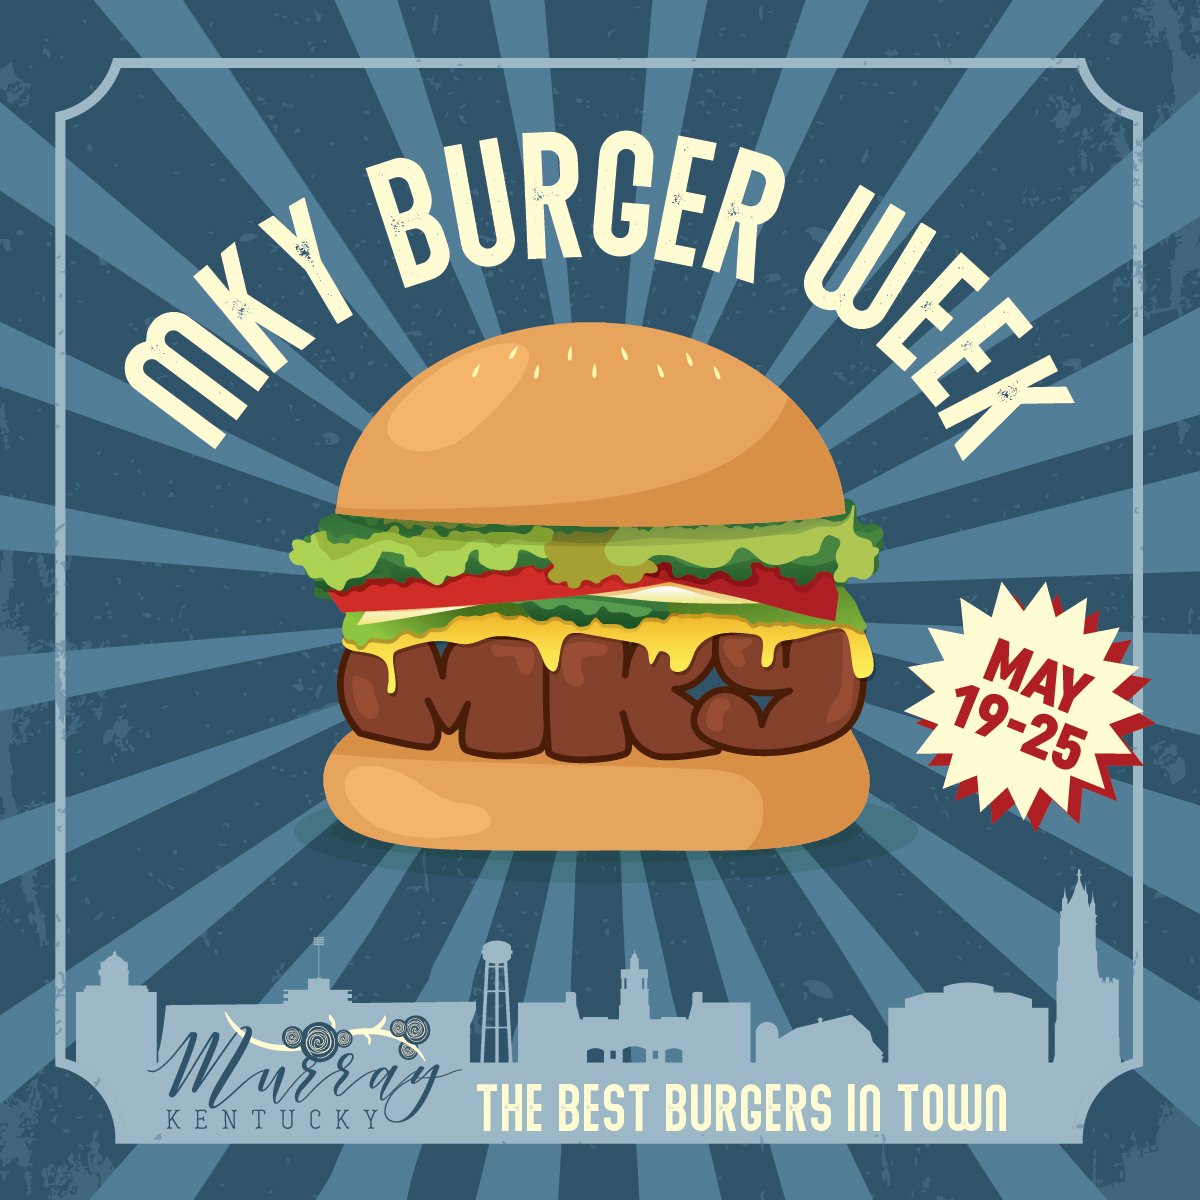 SAVE THE DATE to taste &quot;the Best Burgers in Town&quot; during MKY Burger Week, May 19-25!🍔 Follow us as we share updates leading up to this fun promotion with local partners. 

#MKYBurgerWeek #MurrayKY #MurrayKentucky